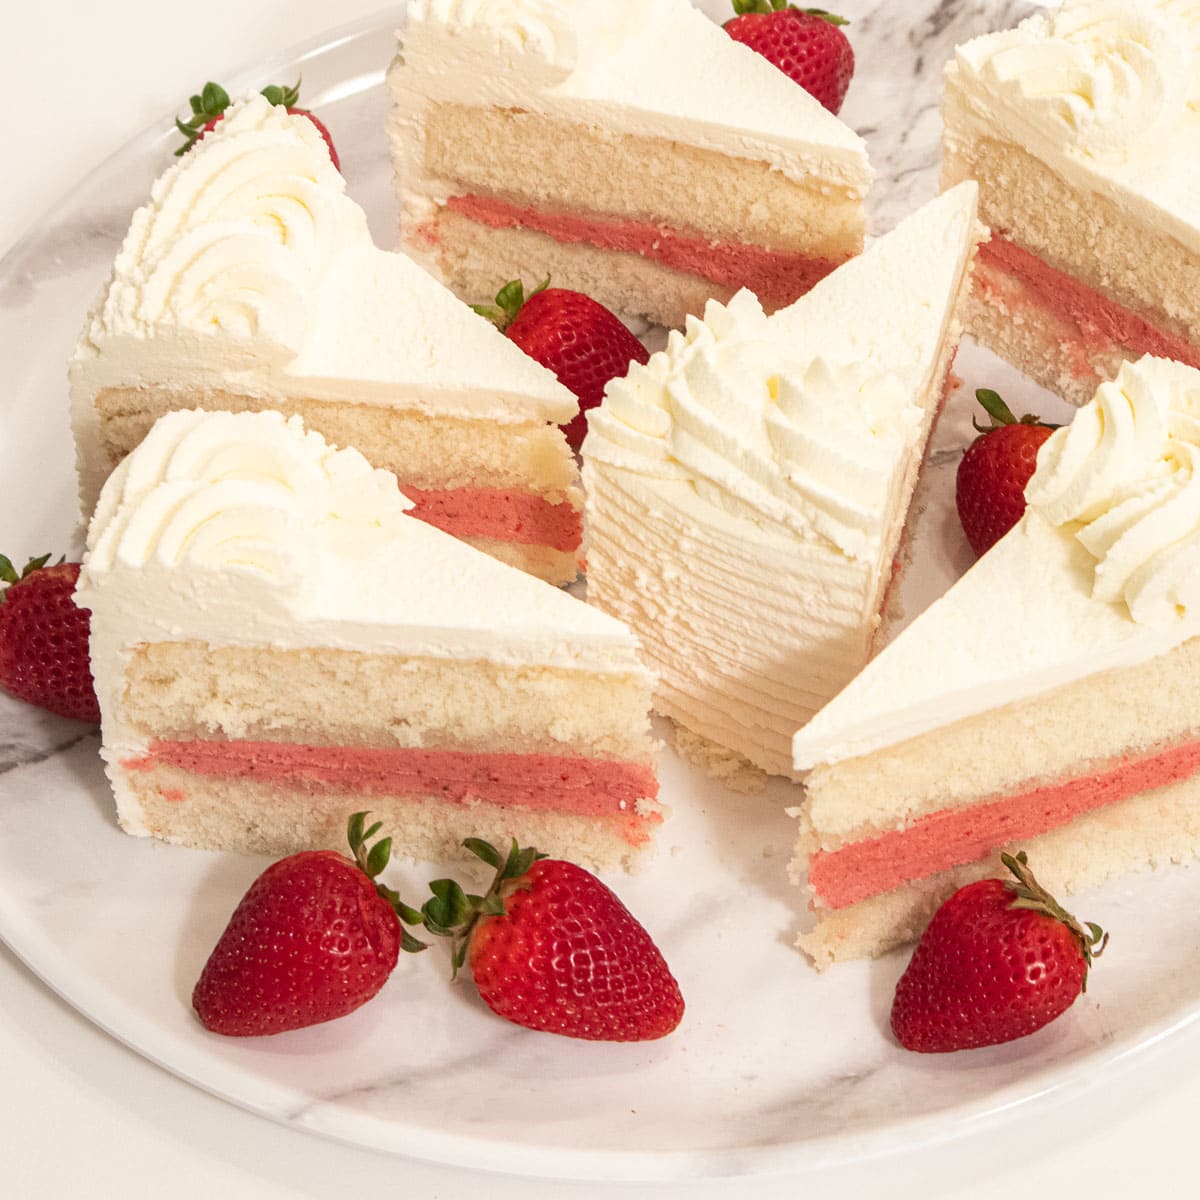 Slices of the Strawberry Cake sit on a marble plate with fresh strawberries.